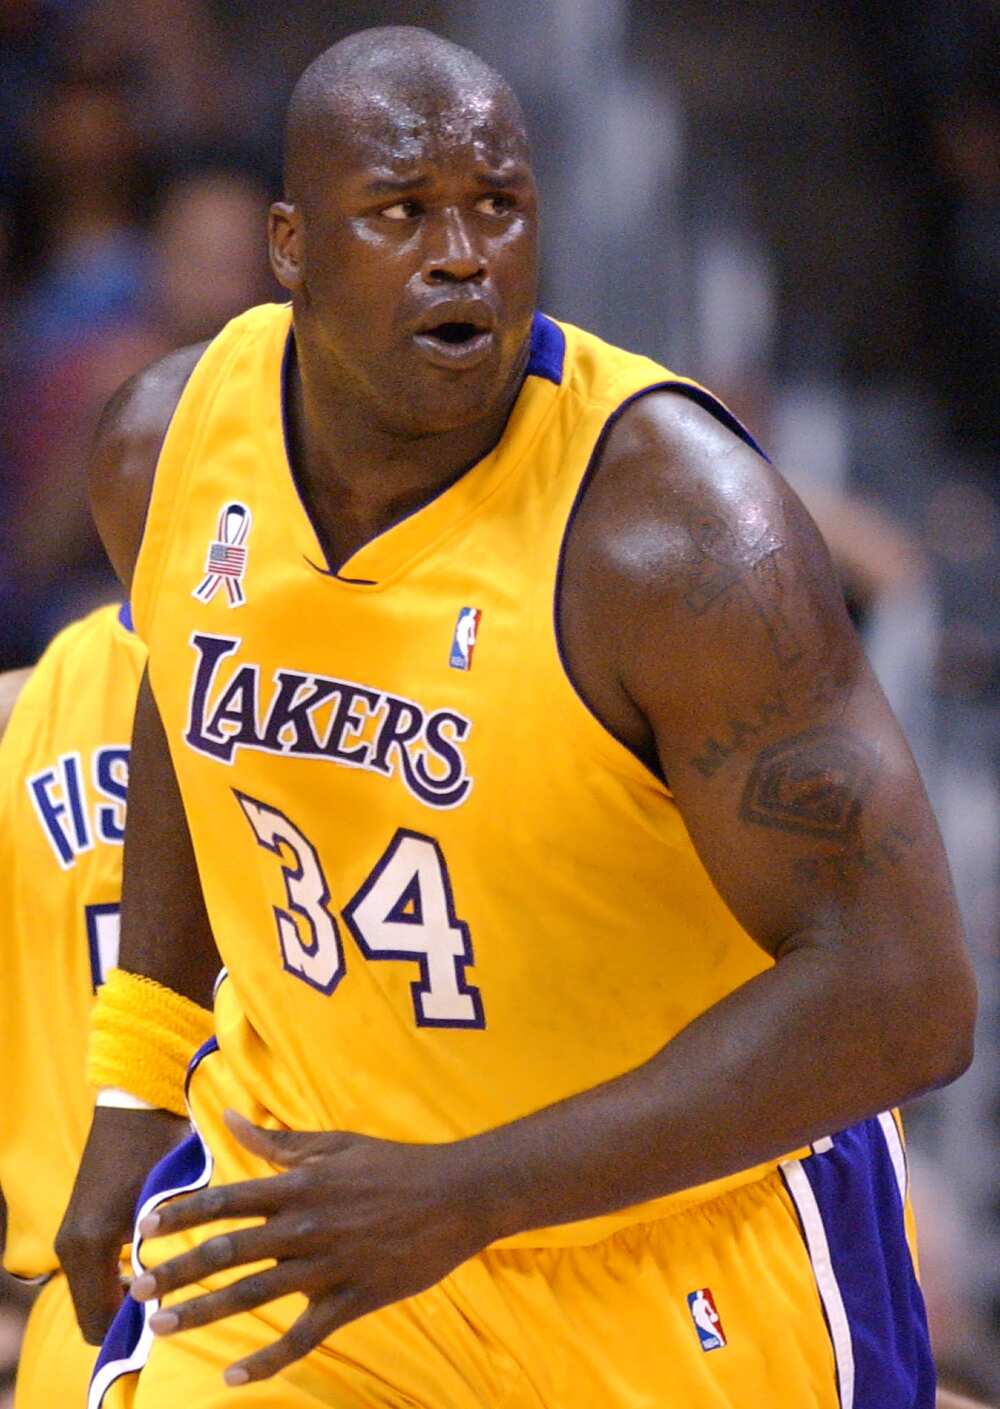 PHOTOS: Shaq through the years with the Lakers